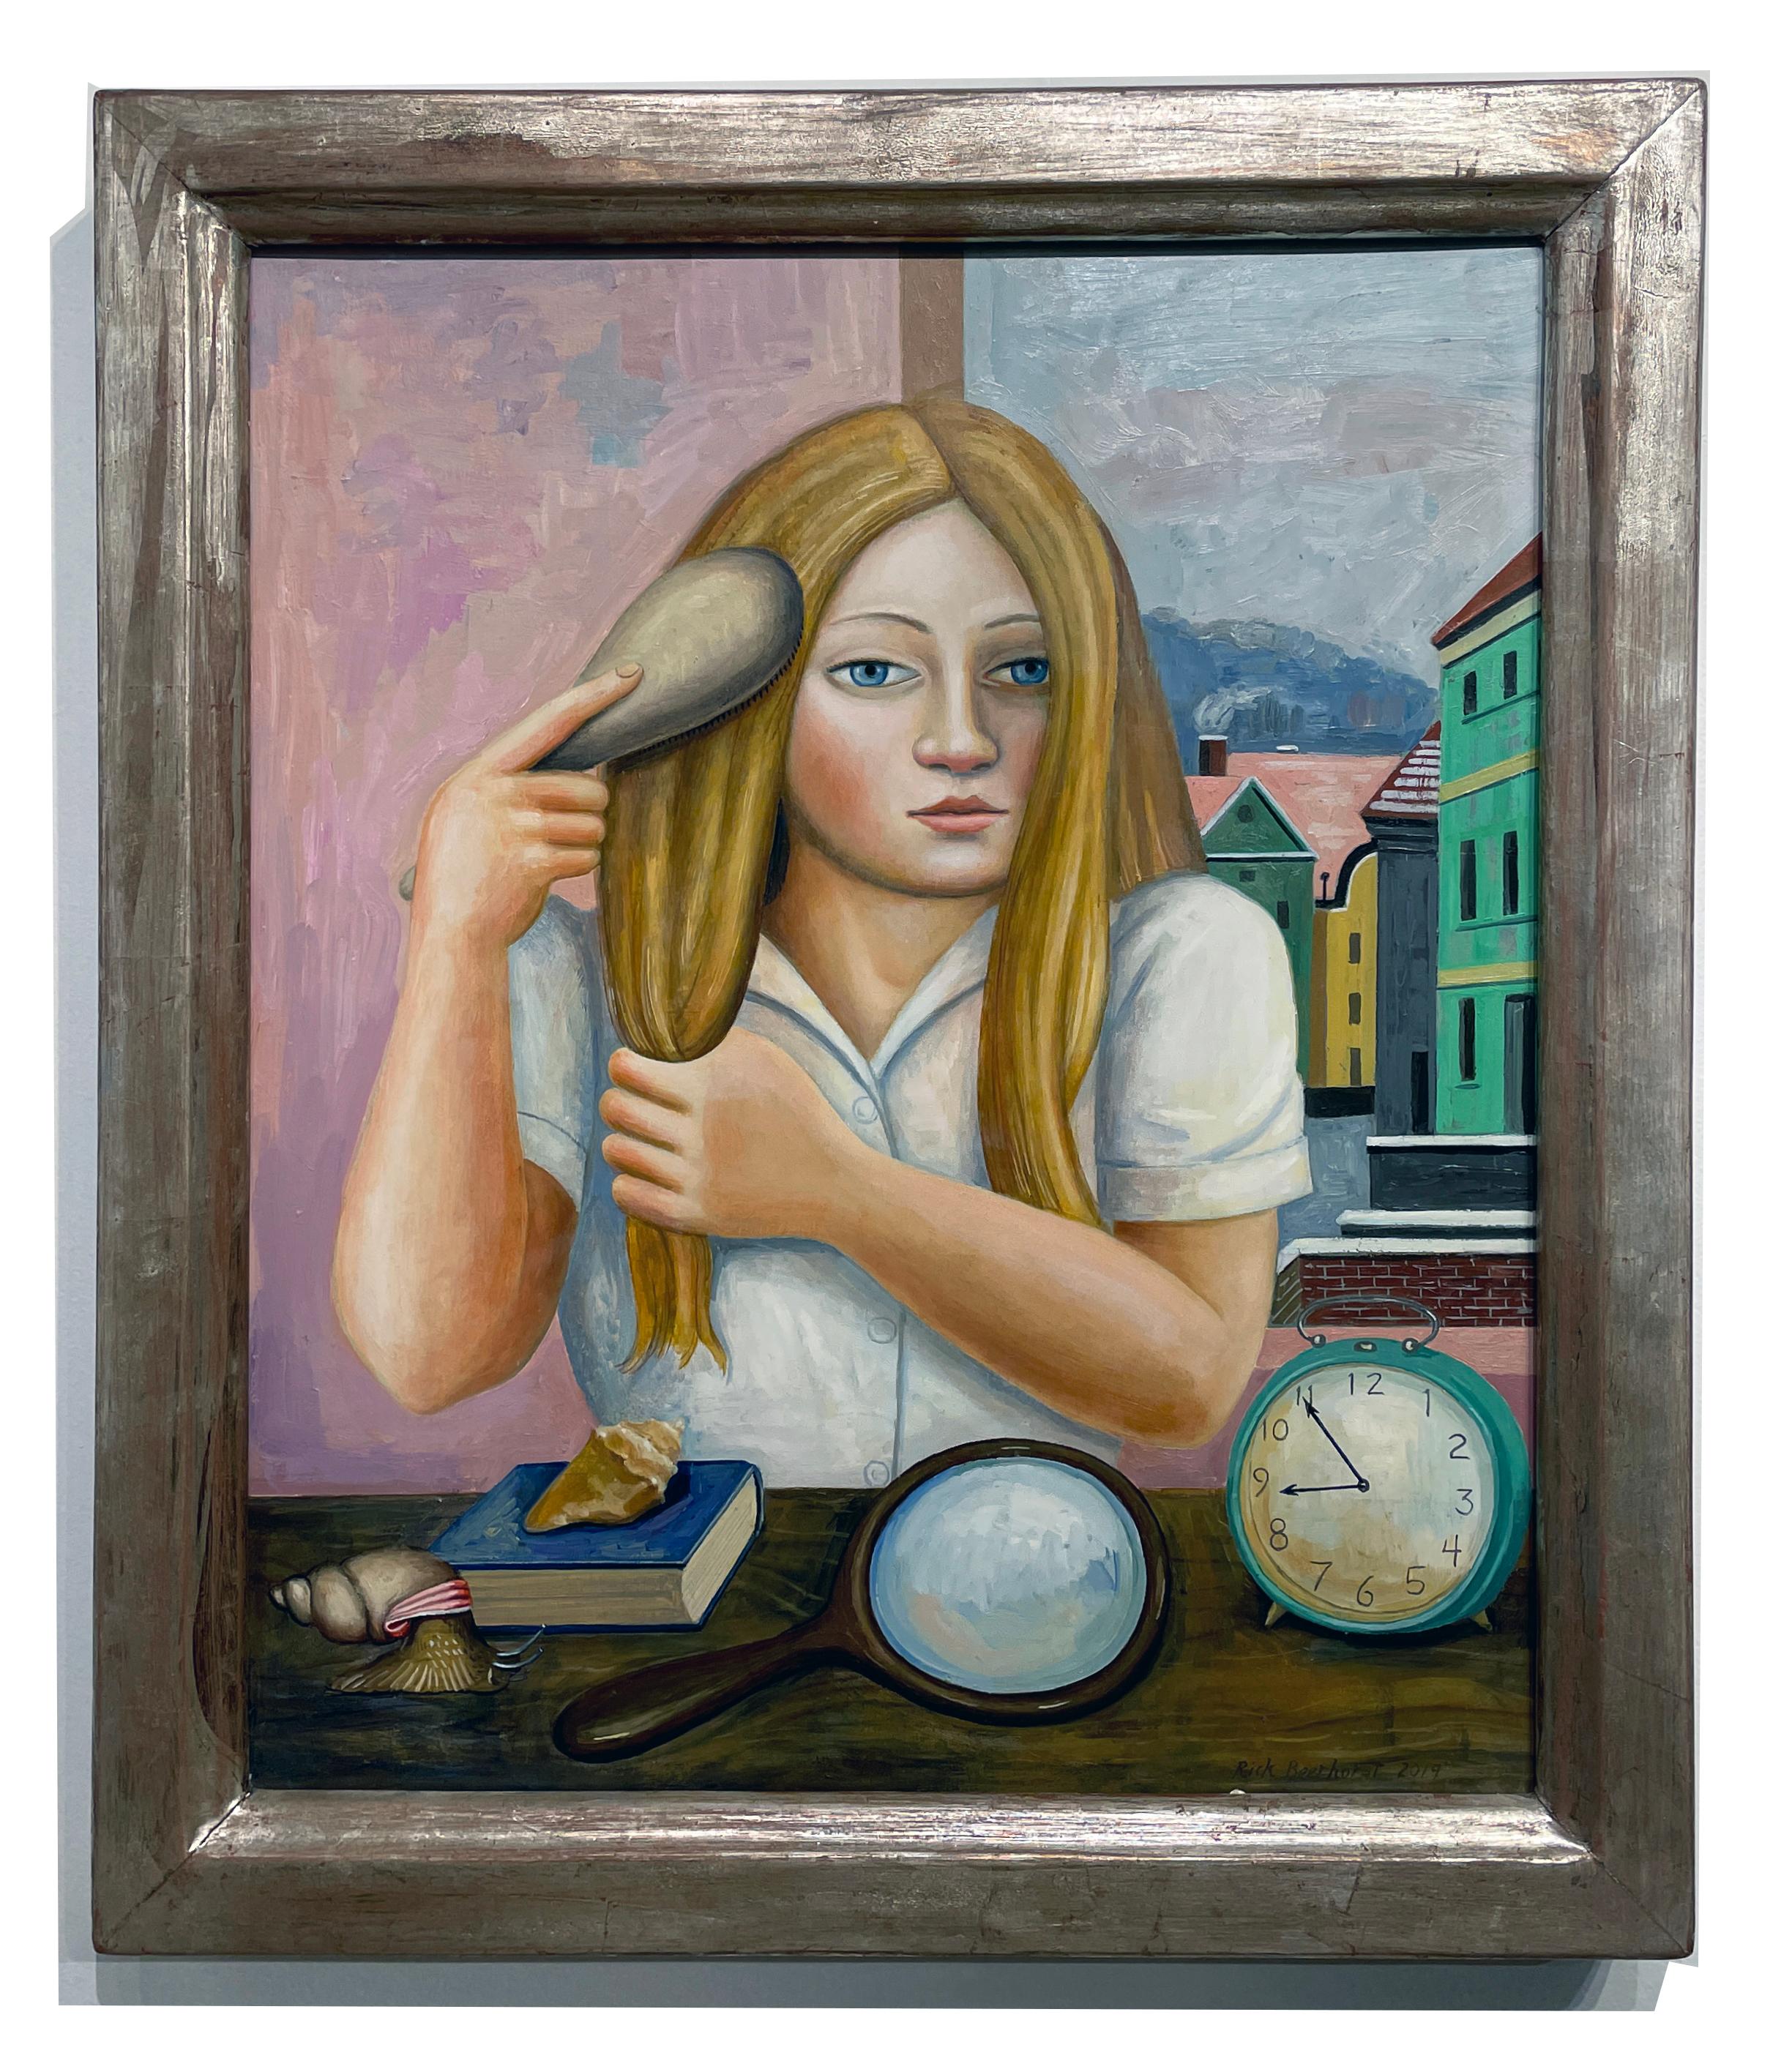 Brushing Her Hair - Portrait of a Young Woman with Various Objects and Window - Painting by Rick Beerhorst